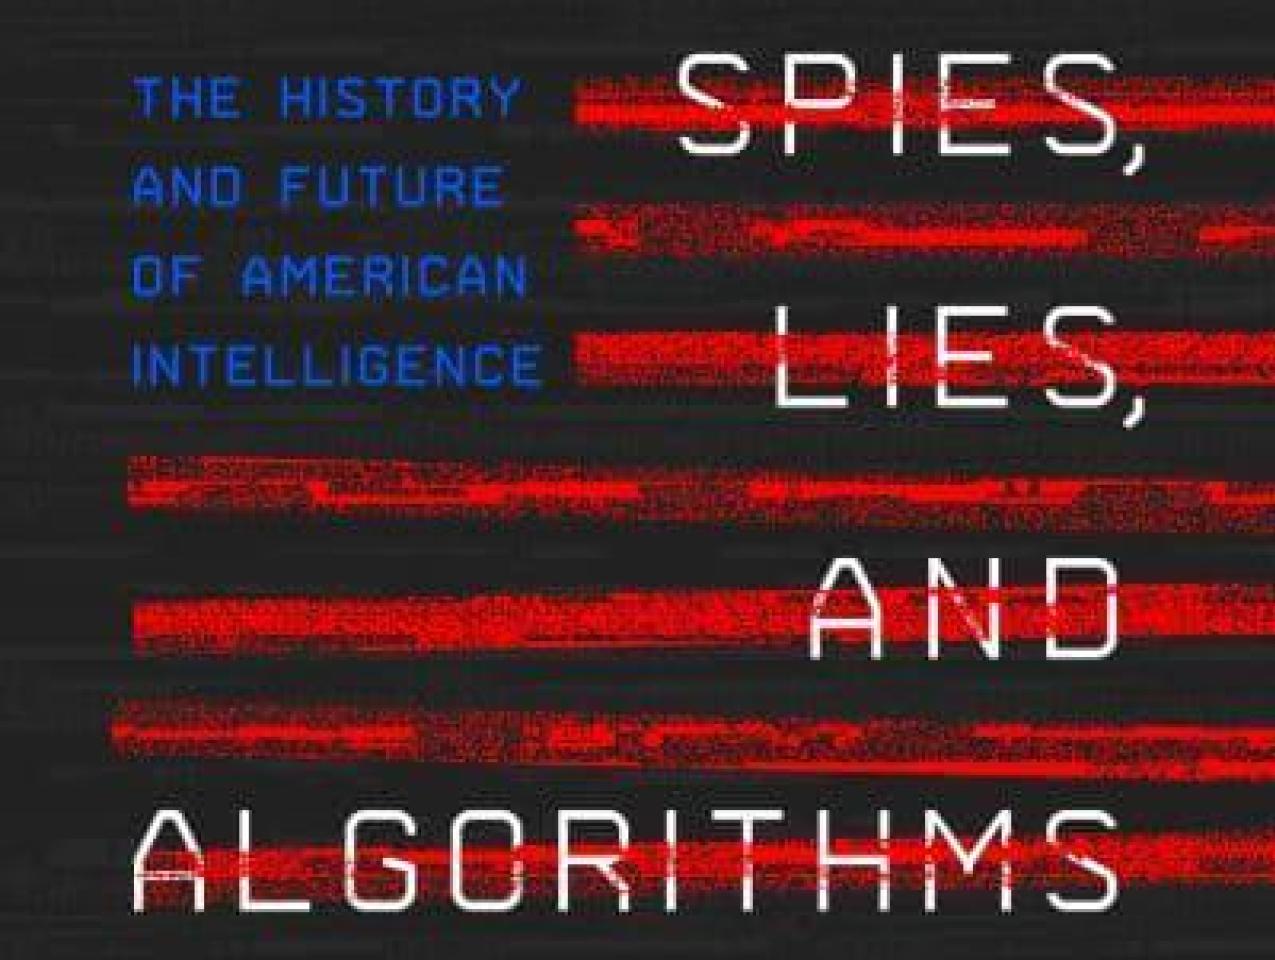 Spies Lies And Algorithms